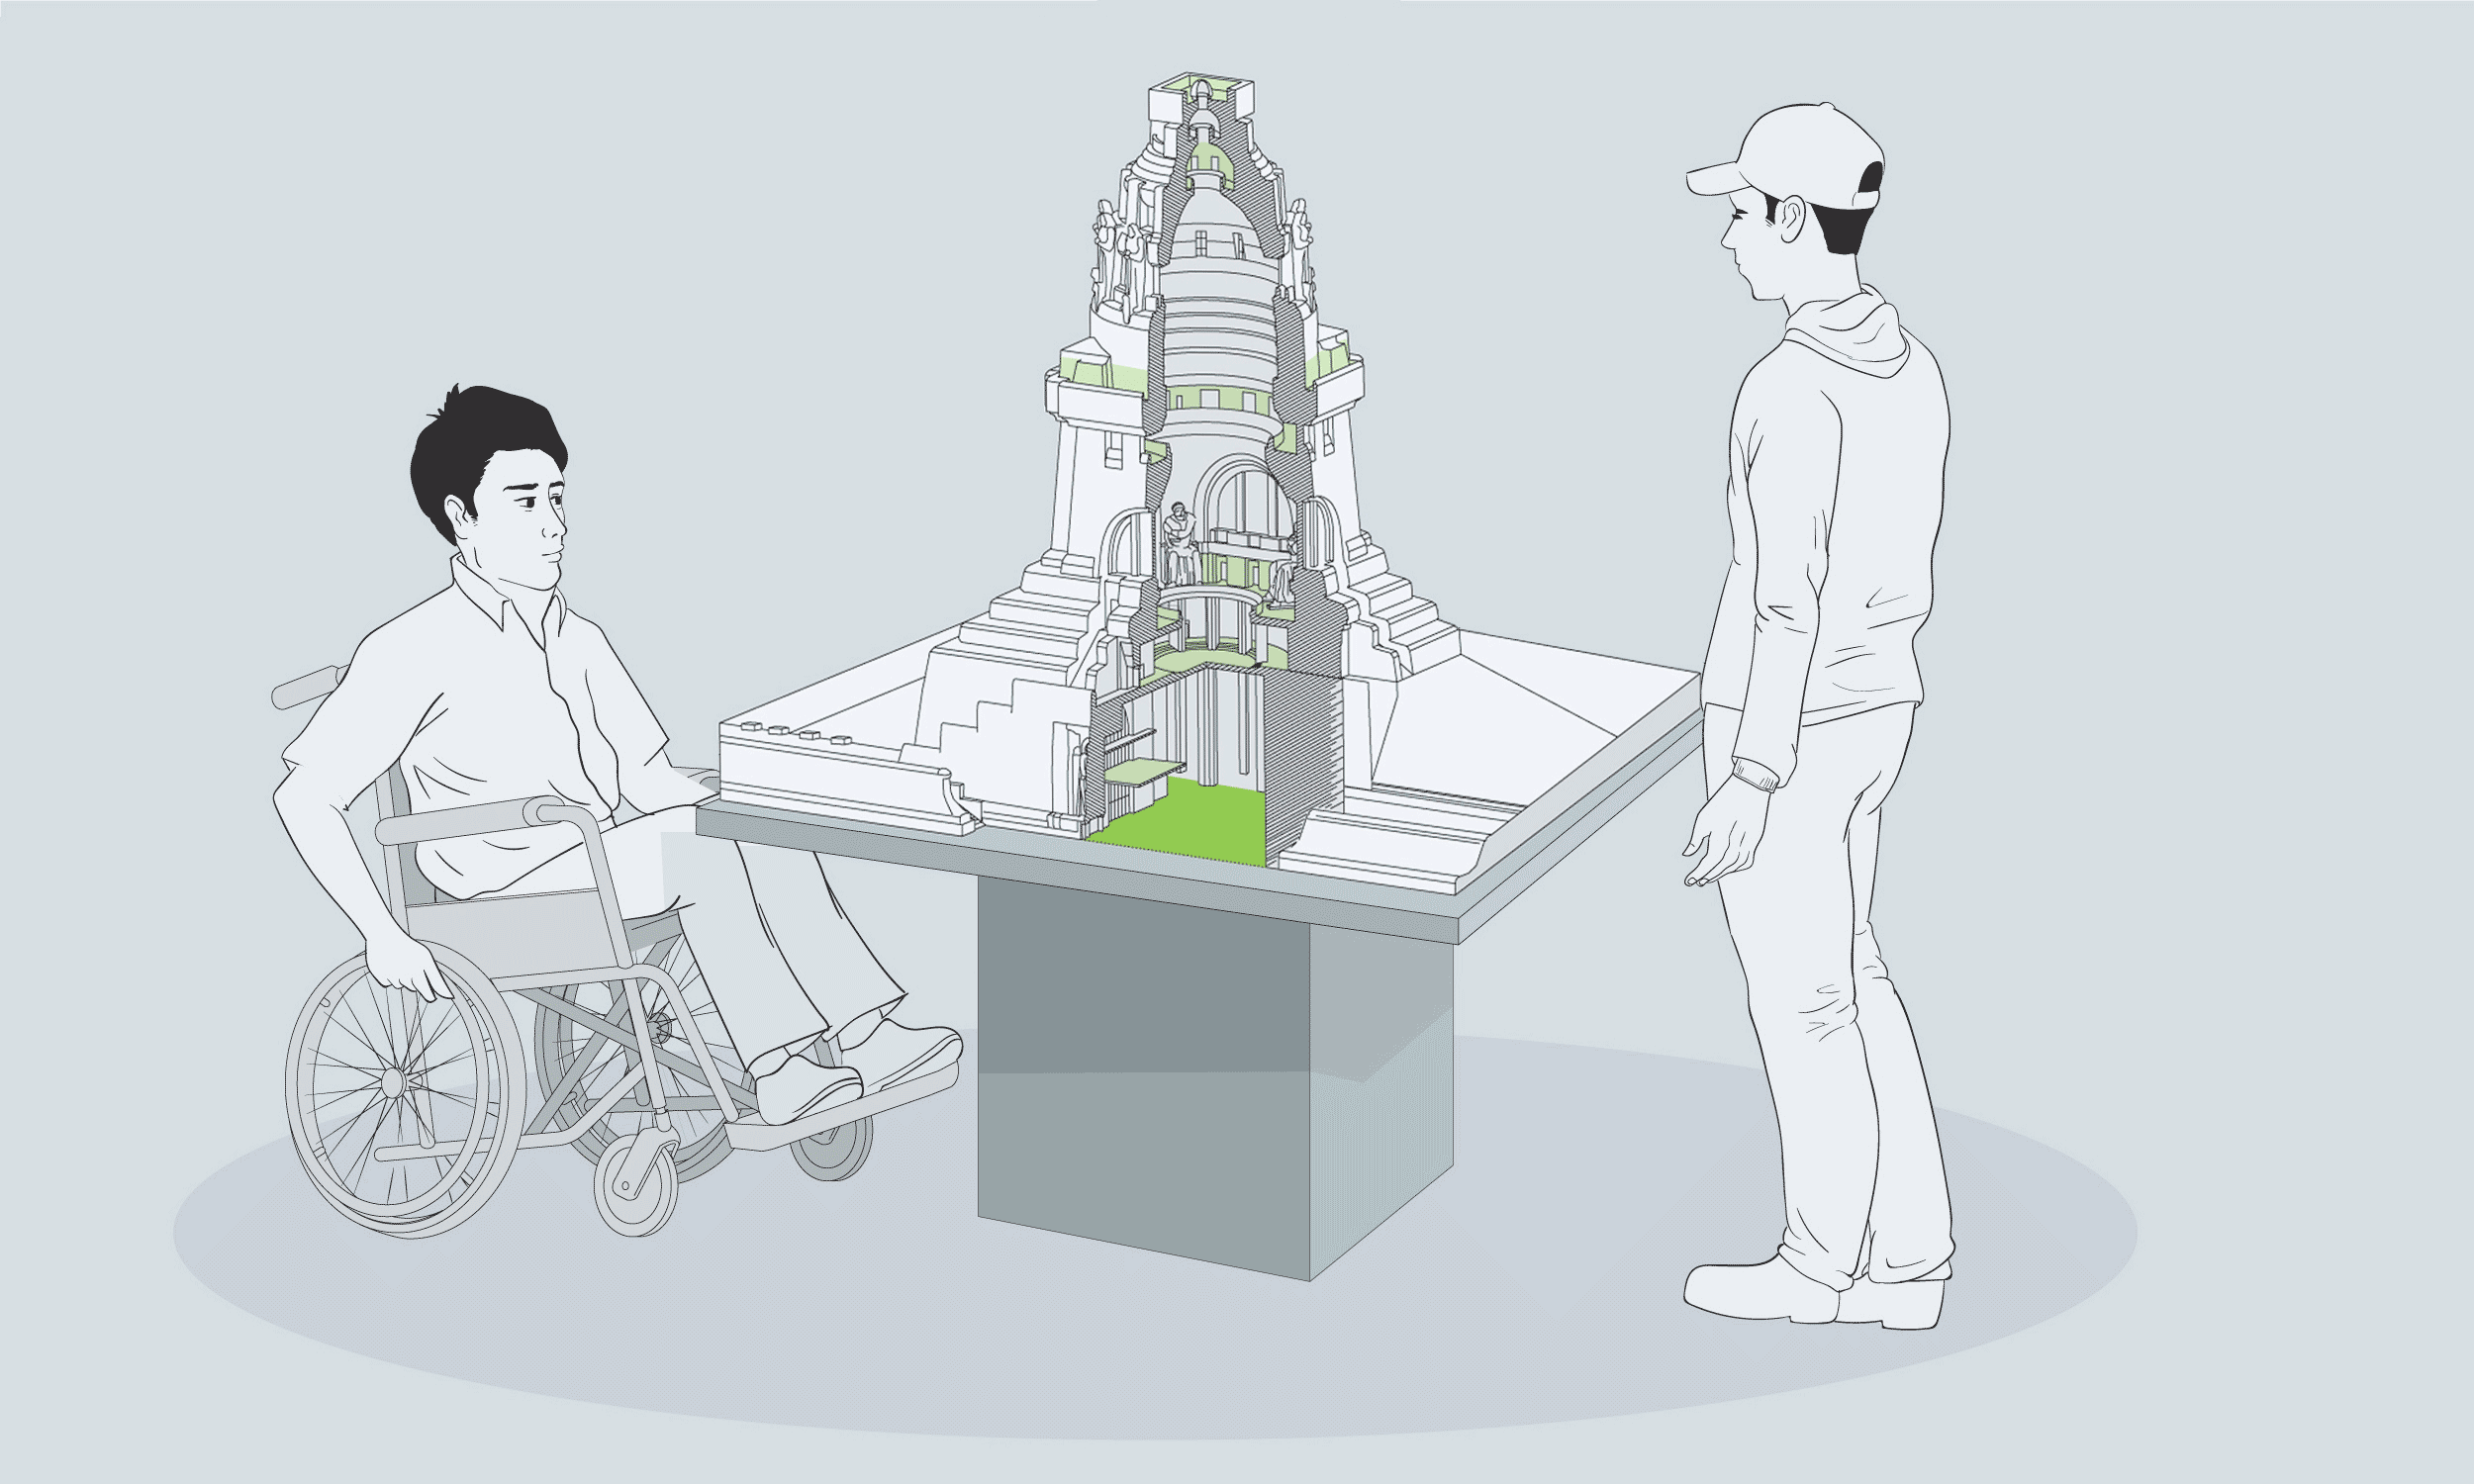 Illustration of the tactile model "Monument to the Battle of the Nations" for blind and visually impaired visitors and people in wheelchairs